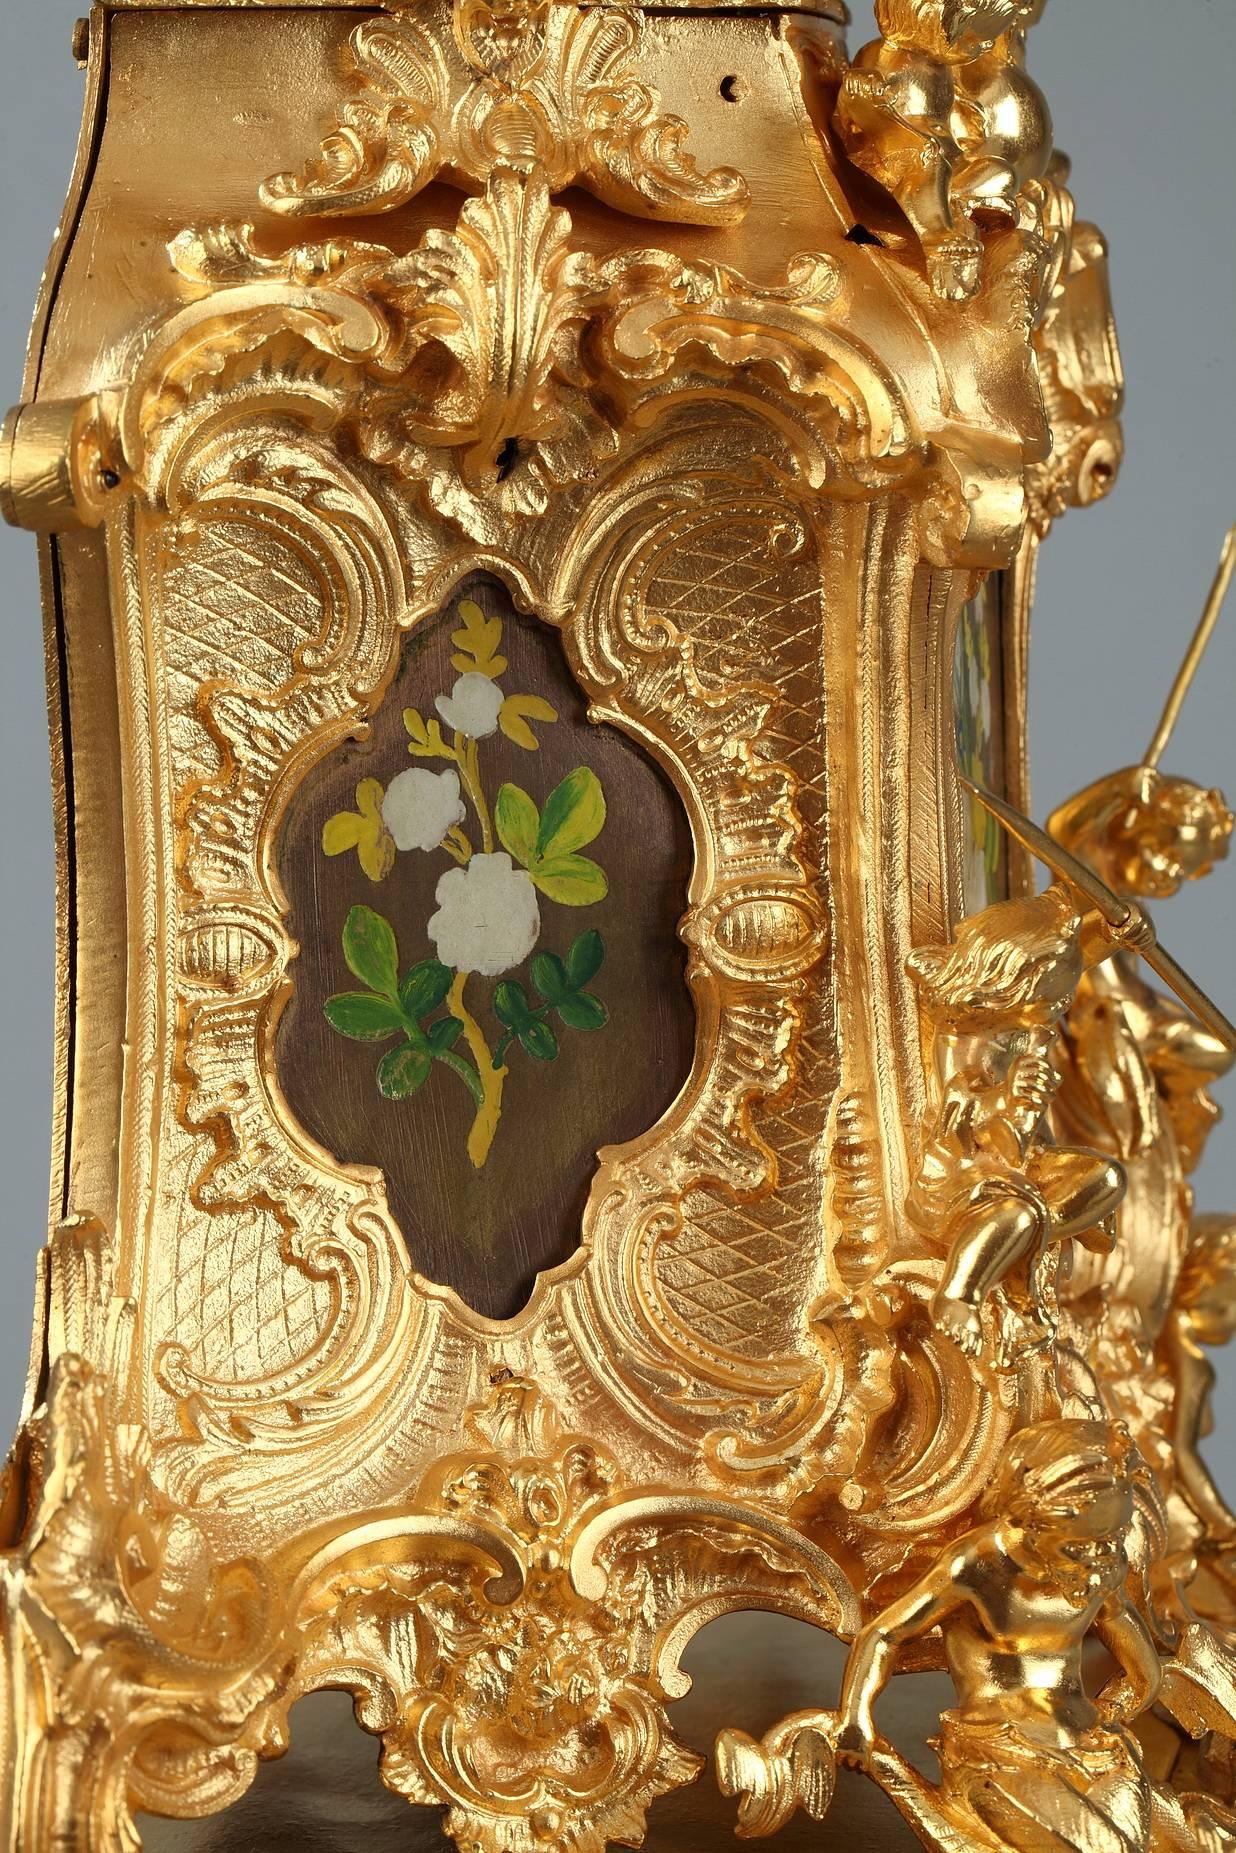 Bronze Late 19th Century Rocaille Ormolu Mantel Clock with Floral Decoration For Sale